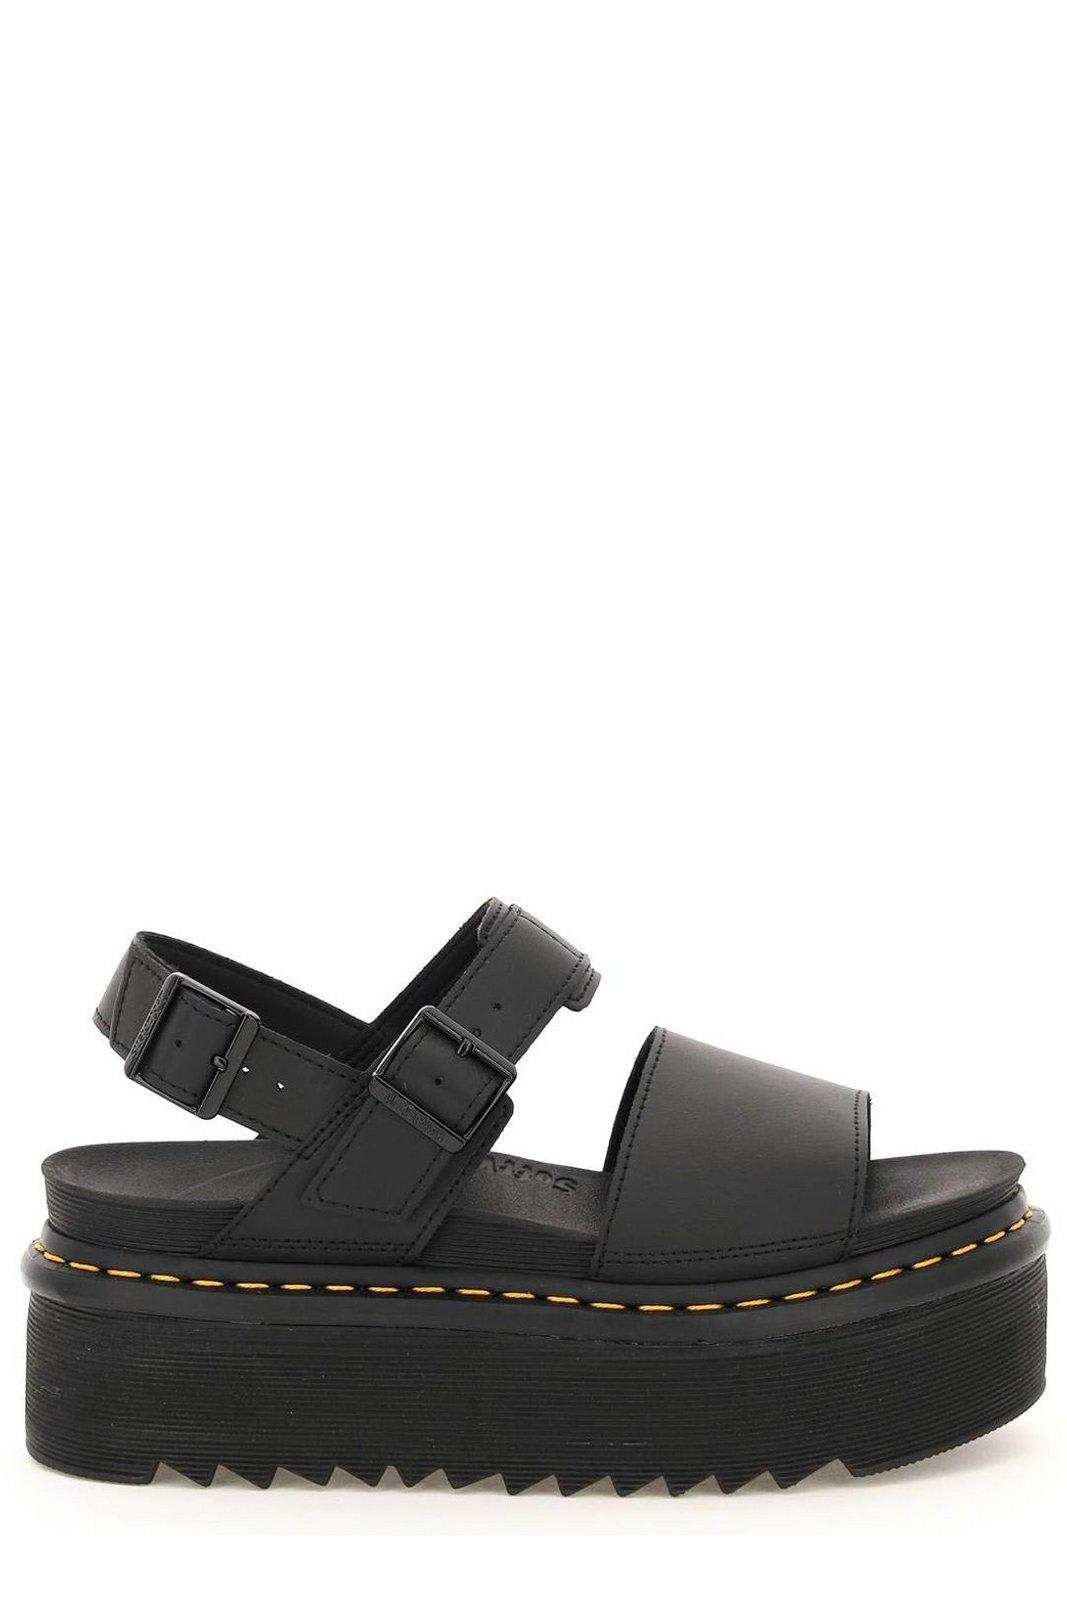 Dr. Martens Hydro Voss Quad Buckled Sandals